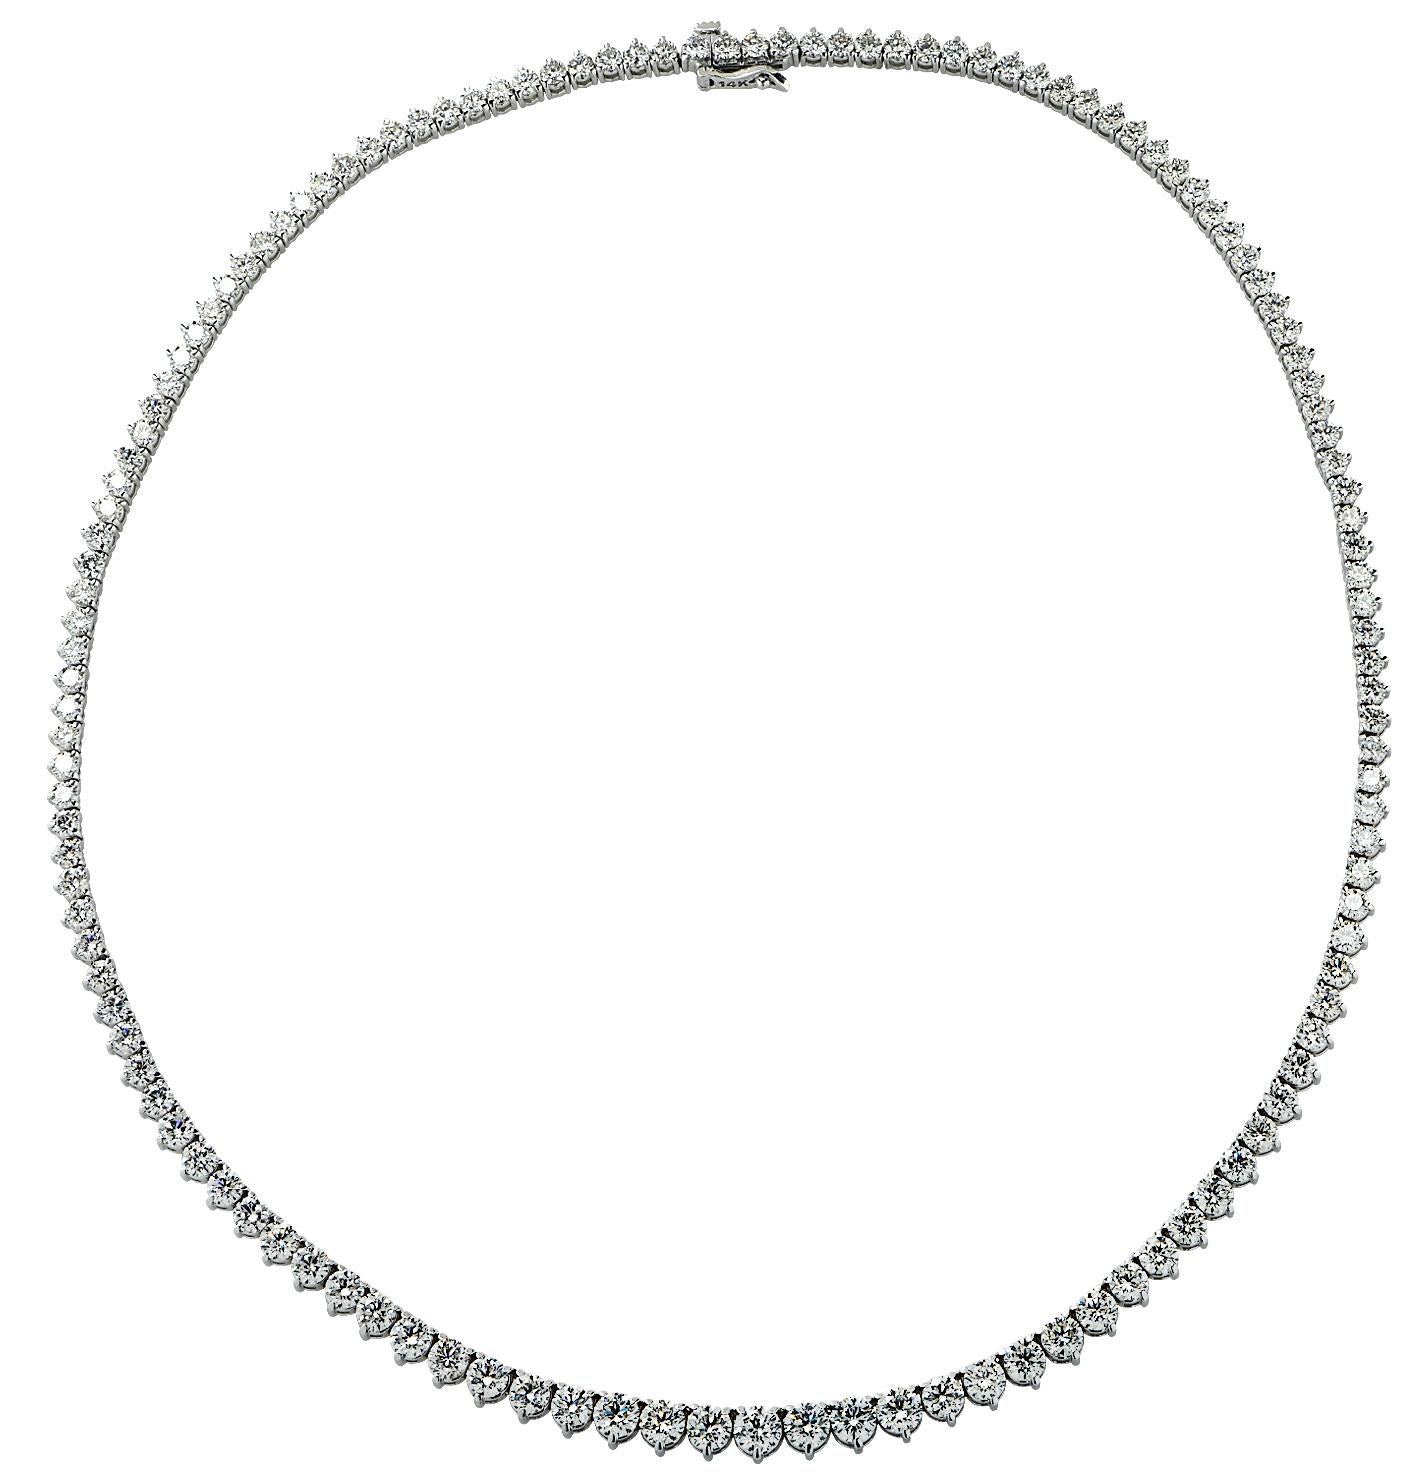 Vivid Diamonds diamond Riviera Necklace crafted in 14 Karat White Gold, featuring round brilliant cut diamonds weighing approximately 19.24 carats total, H-I color, SI clarity. The diamonds sweep around the neck in a dazzling display of brilliance